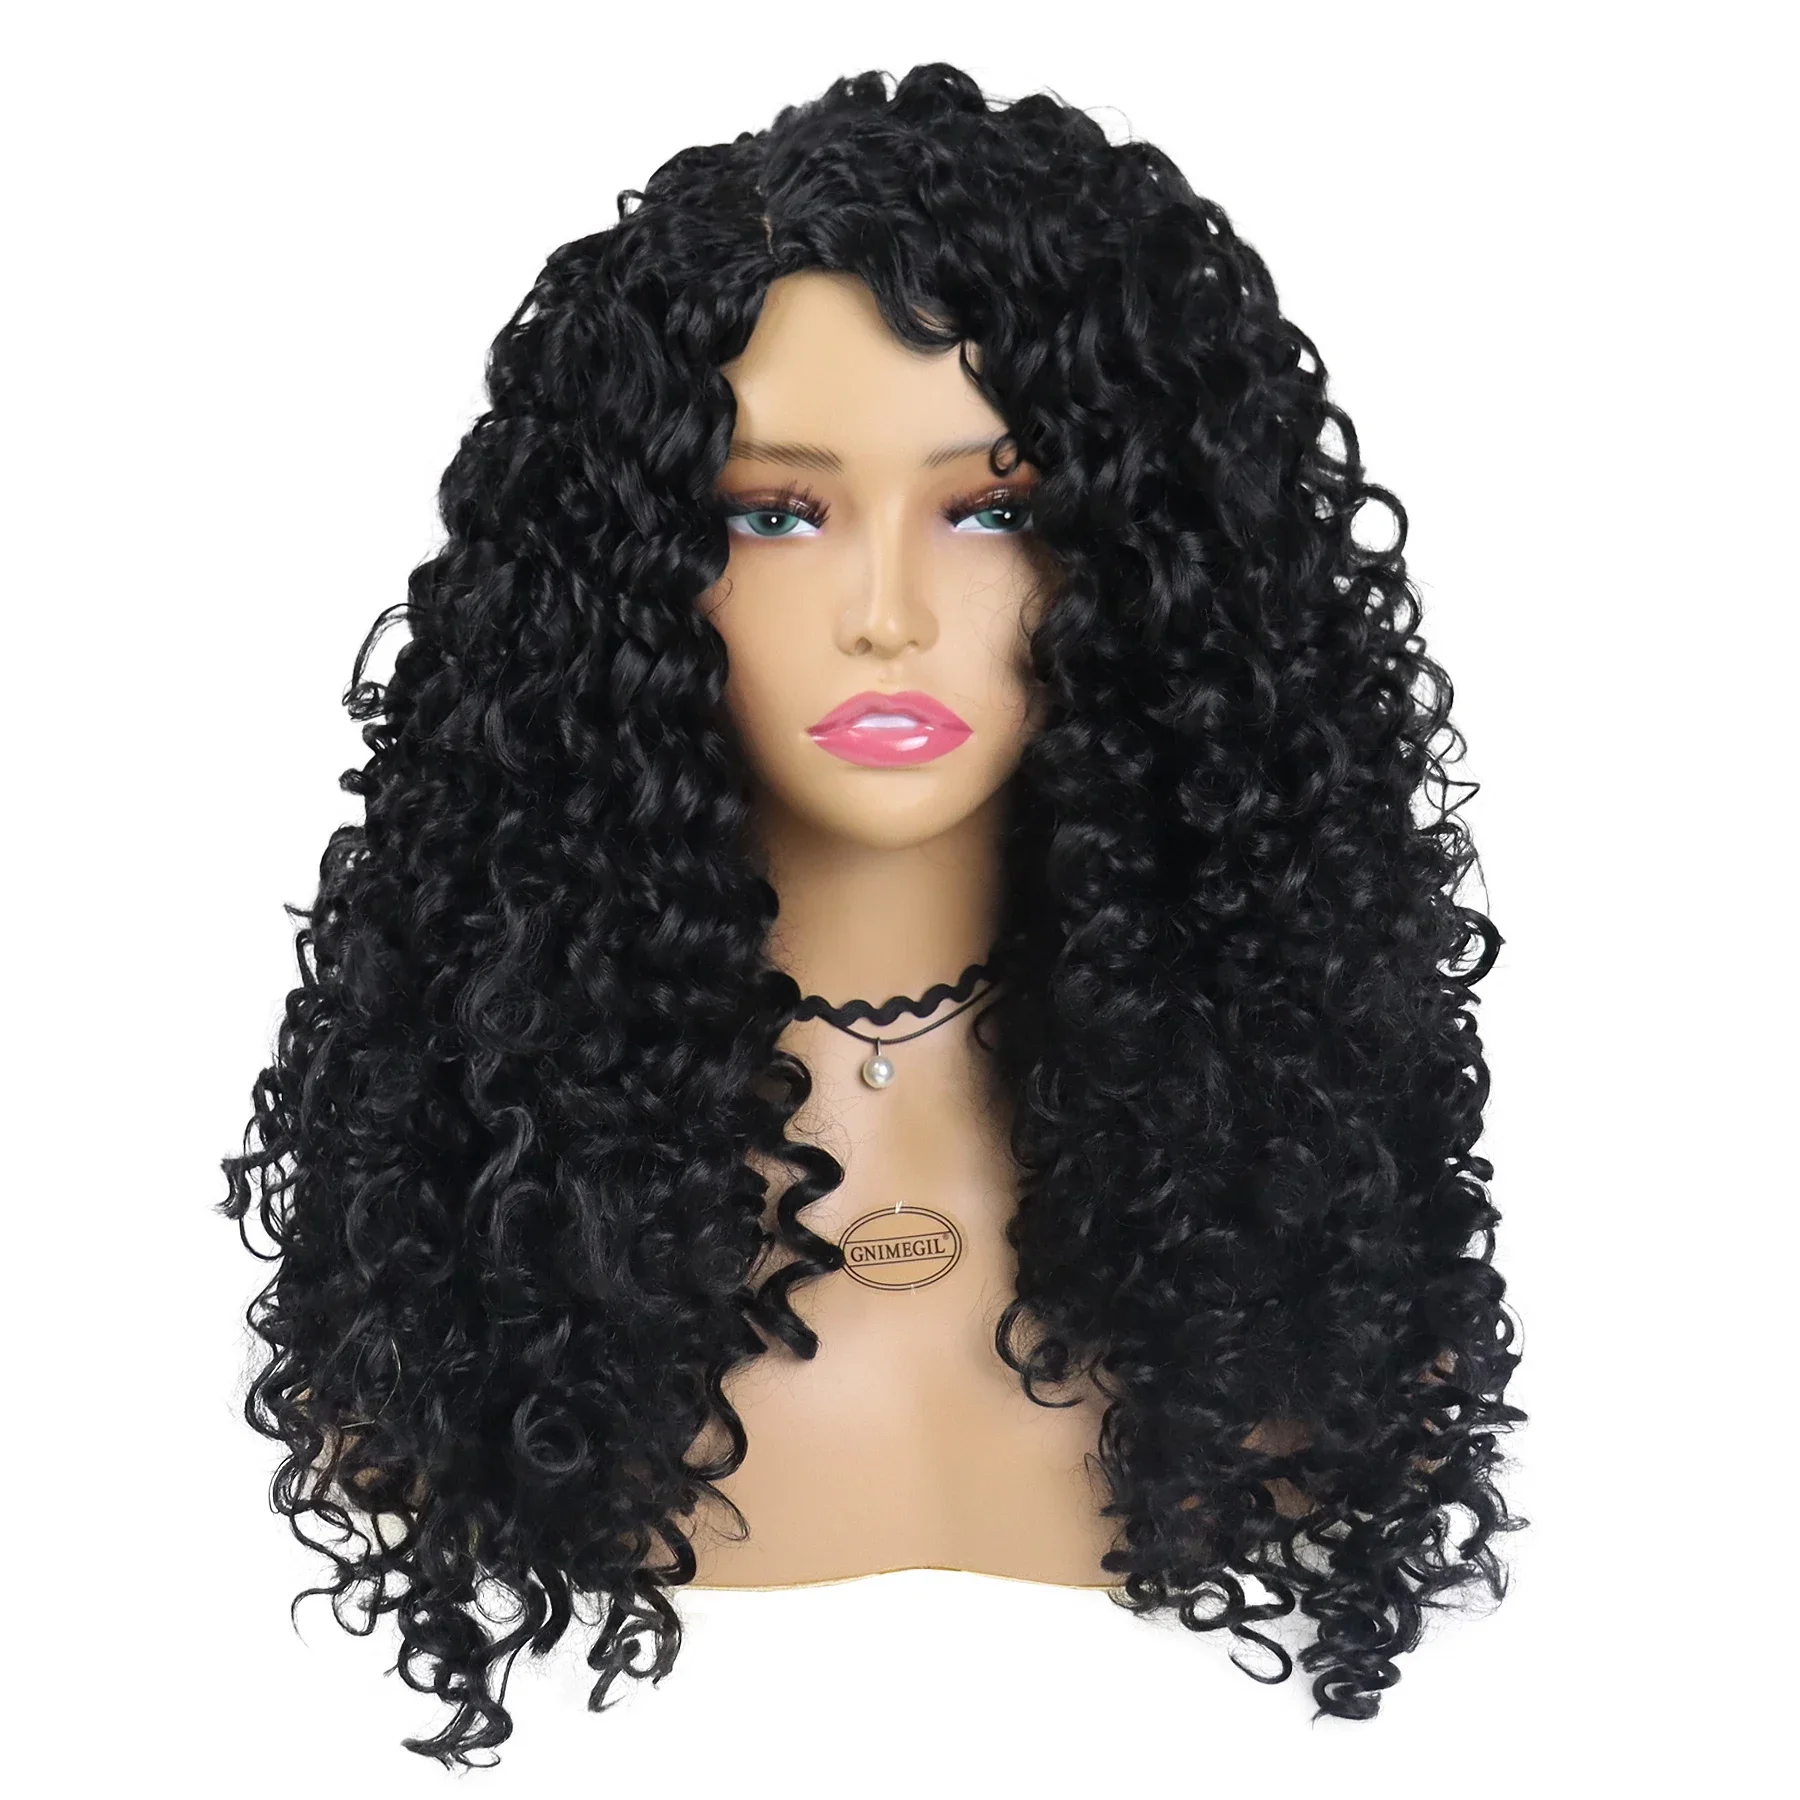 GNIMEGIL Synthetic Long Curly Wig for Woman Big Volume Fluffy Wave Wigs for - $39.37